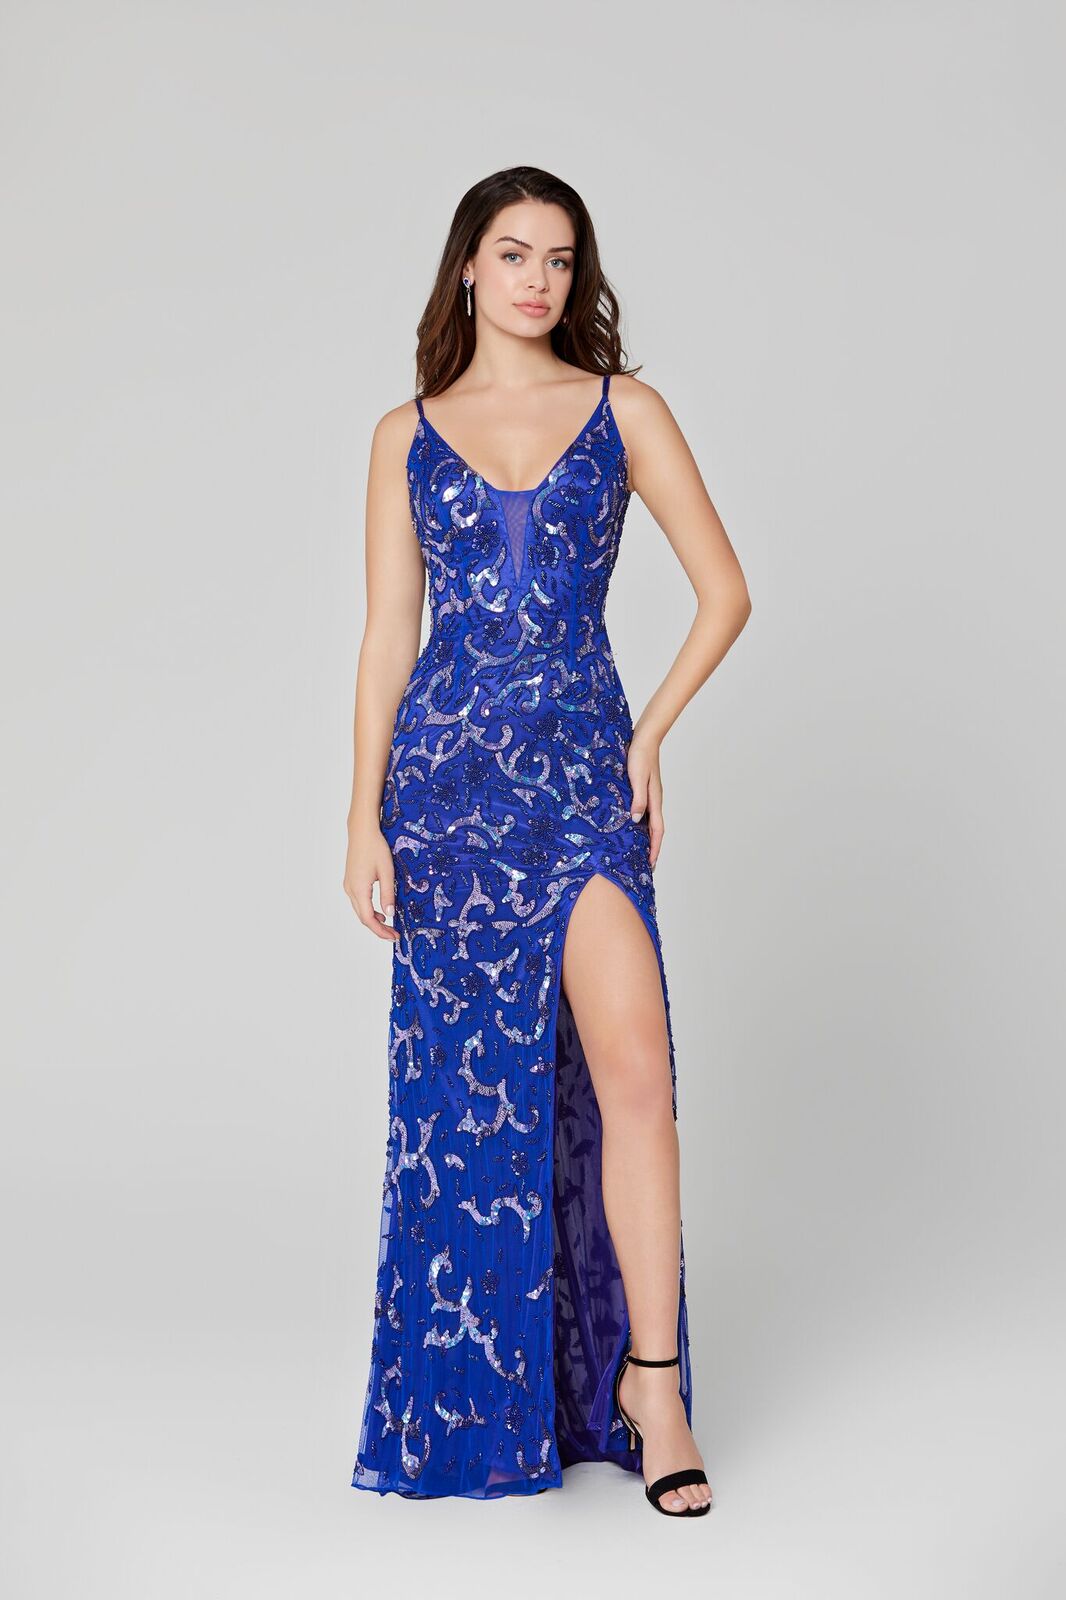 Primavera Couture 3450 Plunging V neckline with mesh panel sequin beaded evening gown.  Embellished Sequin Beaded Fitted Prom Dress Slit Formal evening gown. Open Back, Backless Form Fitted Silhouette.  Available colors:  Royal Blue  Sizes:  12